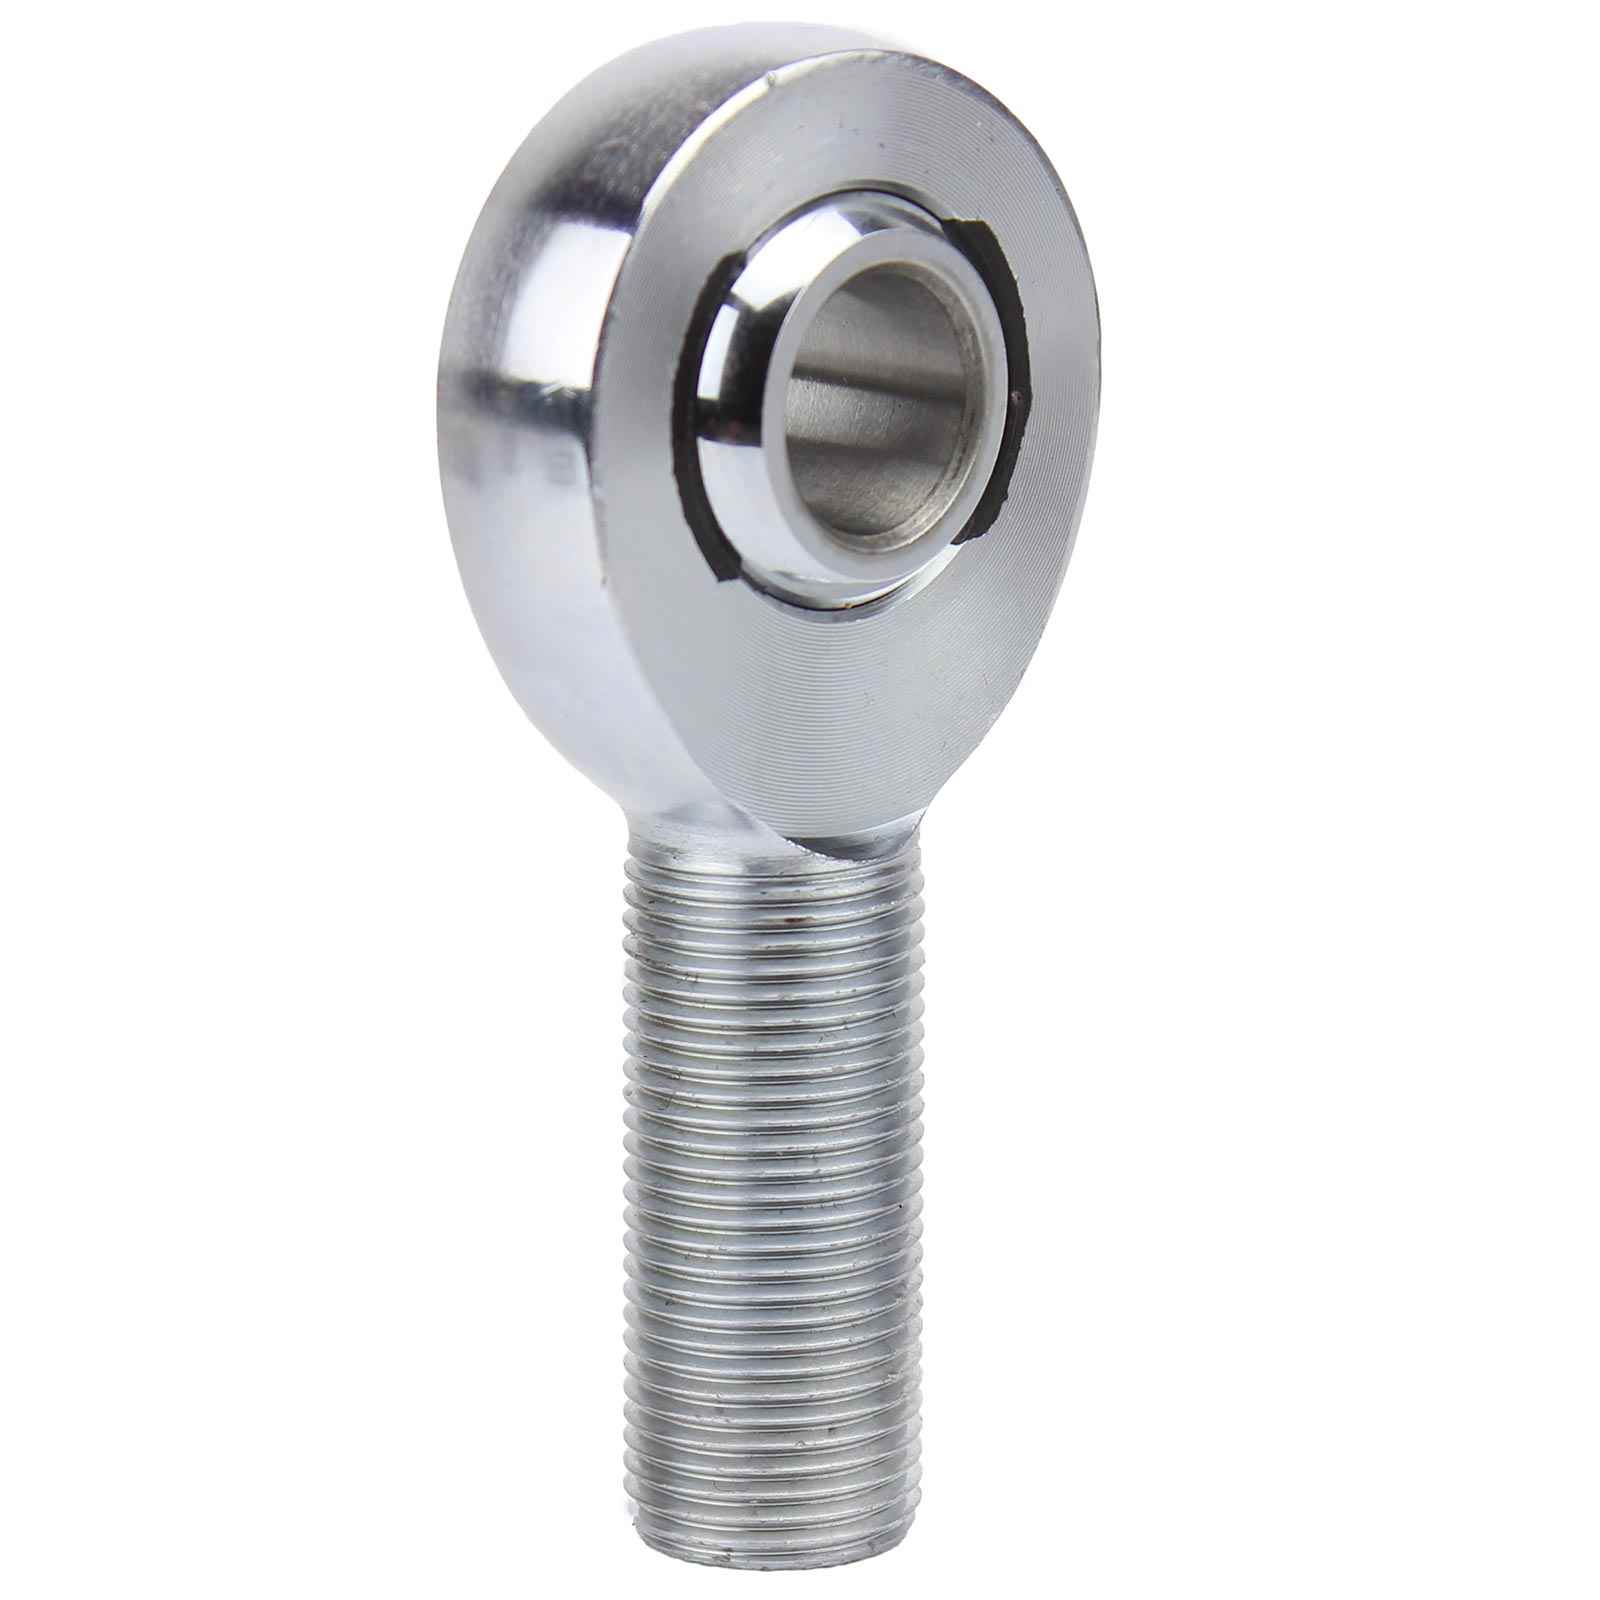 RuffStuff Specialties R1054 5/8 Inch x 5/8 Inch Bore Chromoly Right Hand Threaded Spherical Rod Heim Joint 